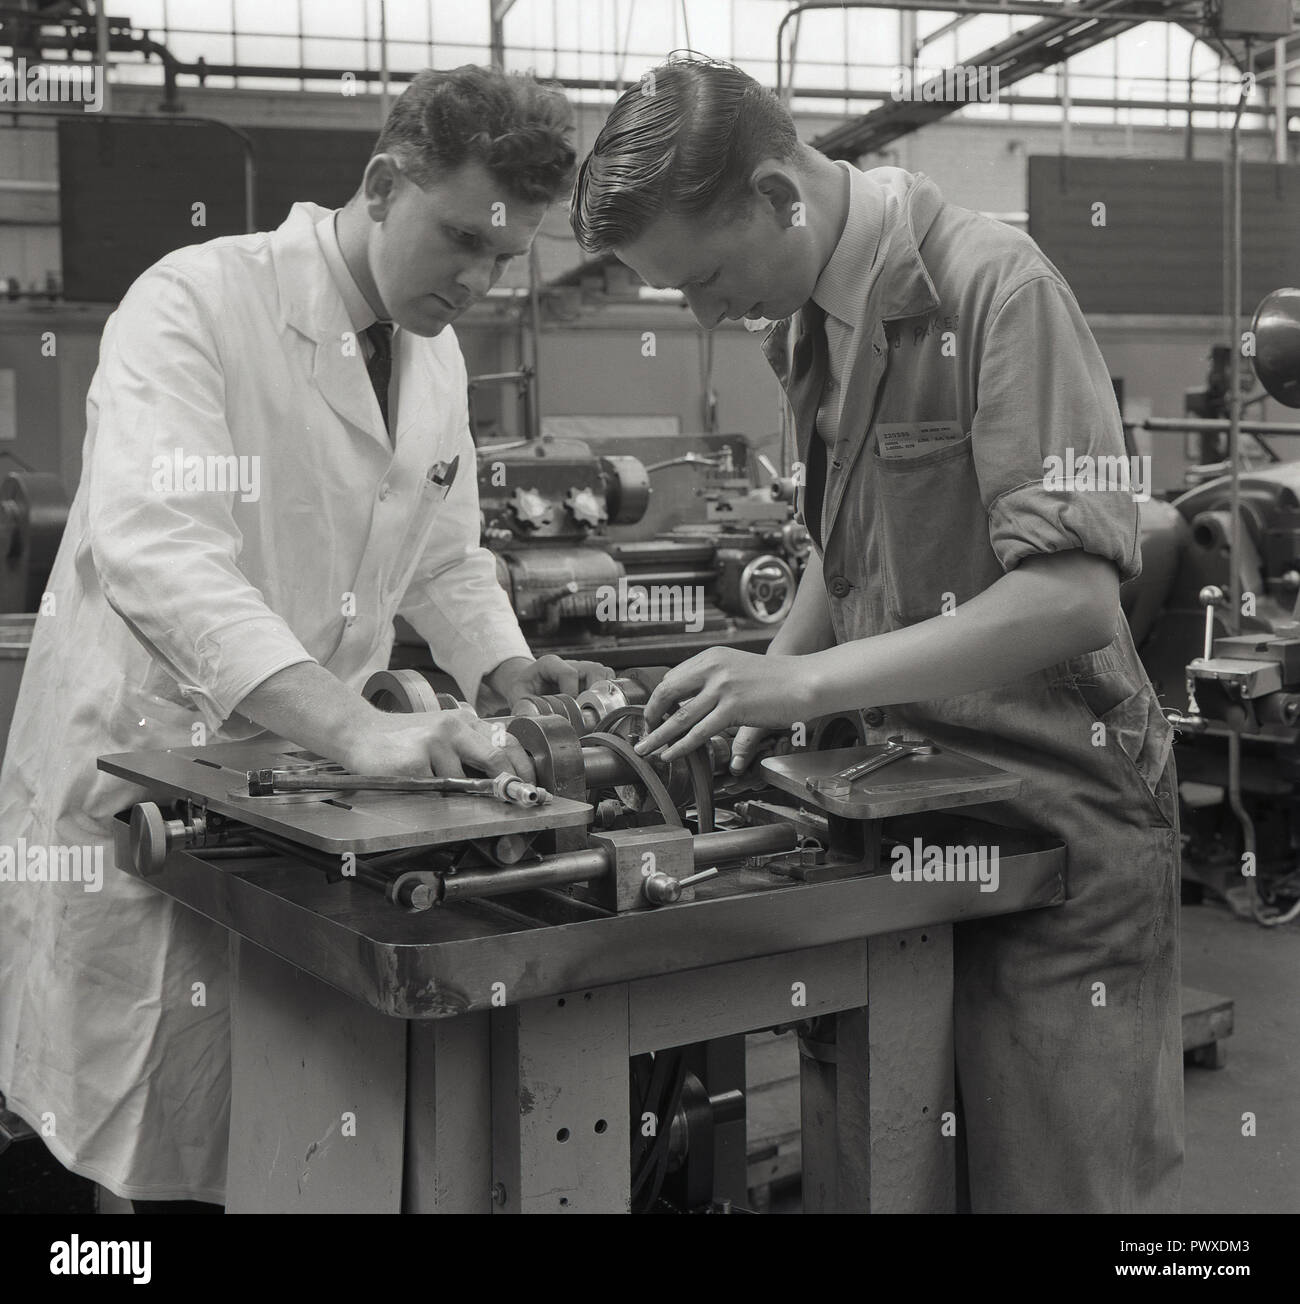 1962, aviation, apprentice, picture shows an experienced white-coated male engineer helping a young male apprentice with a machine tool, England, UK. Stock Photo